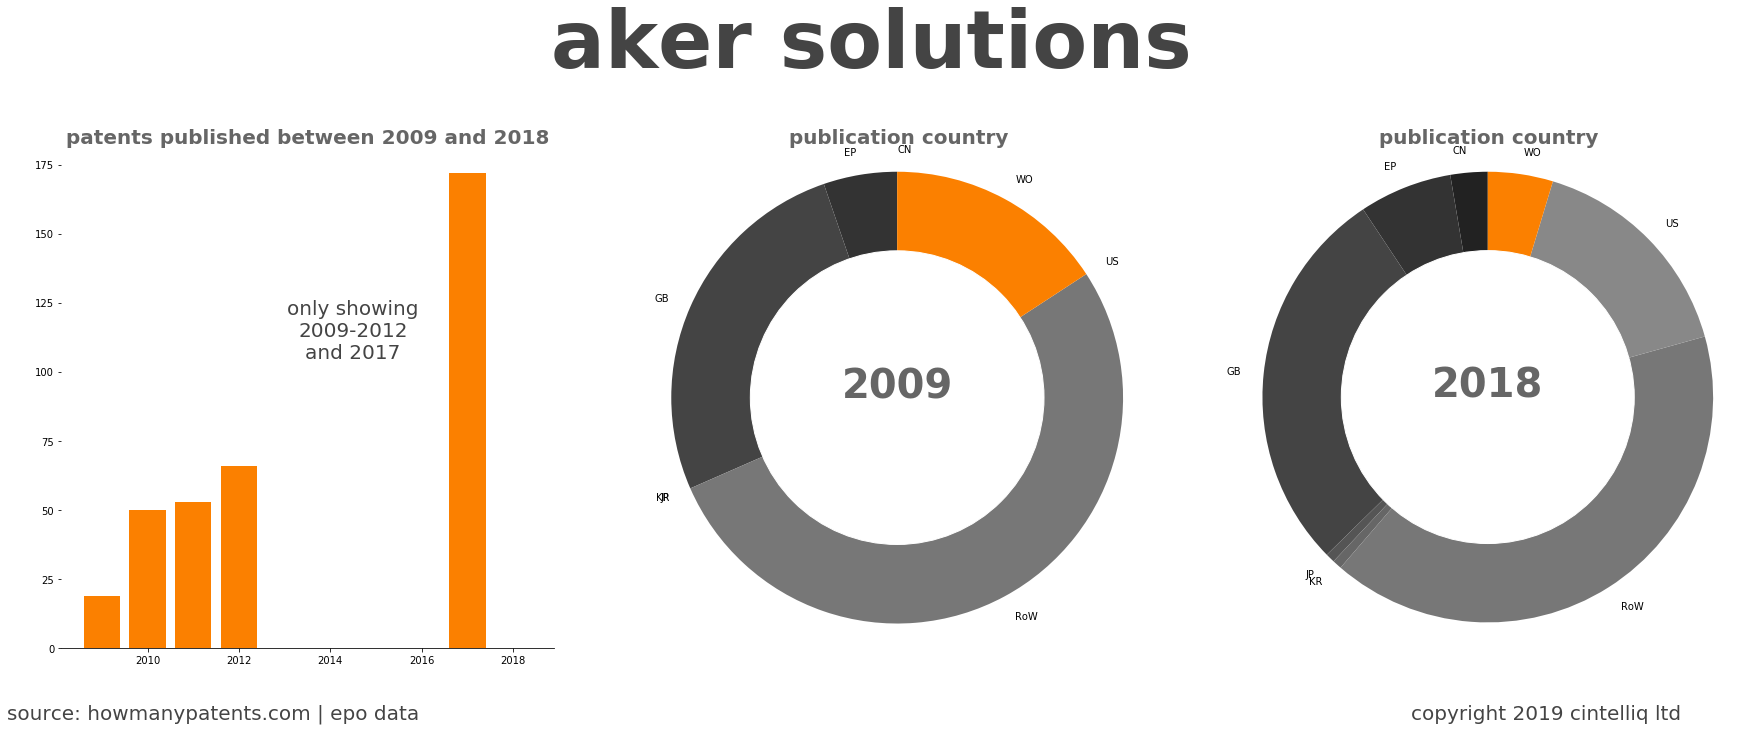 summary of patents for Aker Solutions